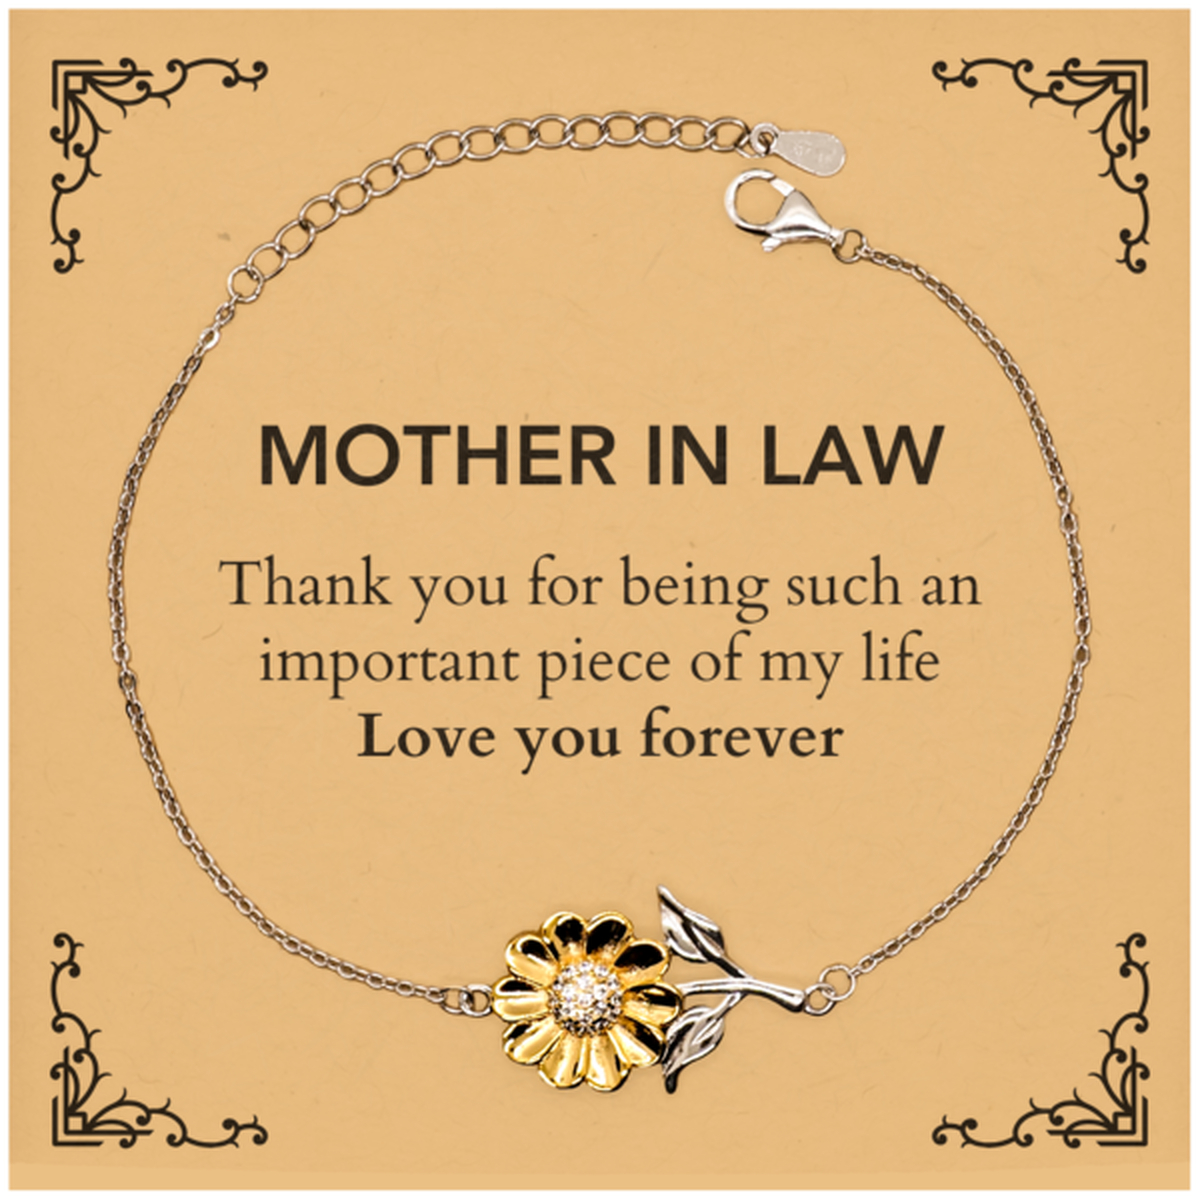 Appropriate Mother In Law Sunflower Bracelet Epic Birthday Gifts for Mother In Law Thank you for being such an important piece of my life Mother In Law Christmas Mothers Fathers Day